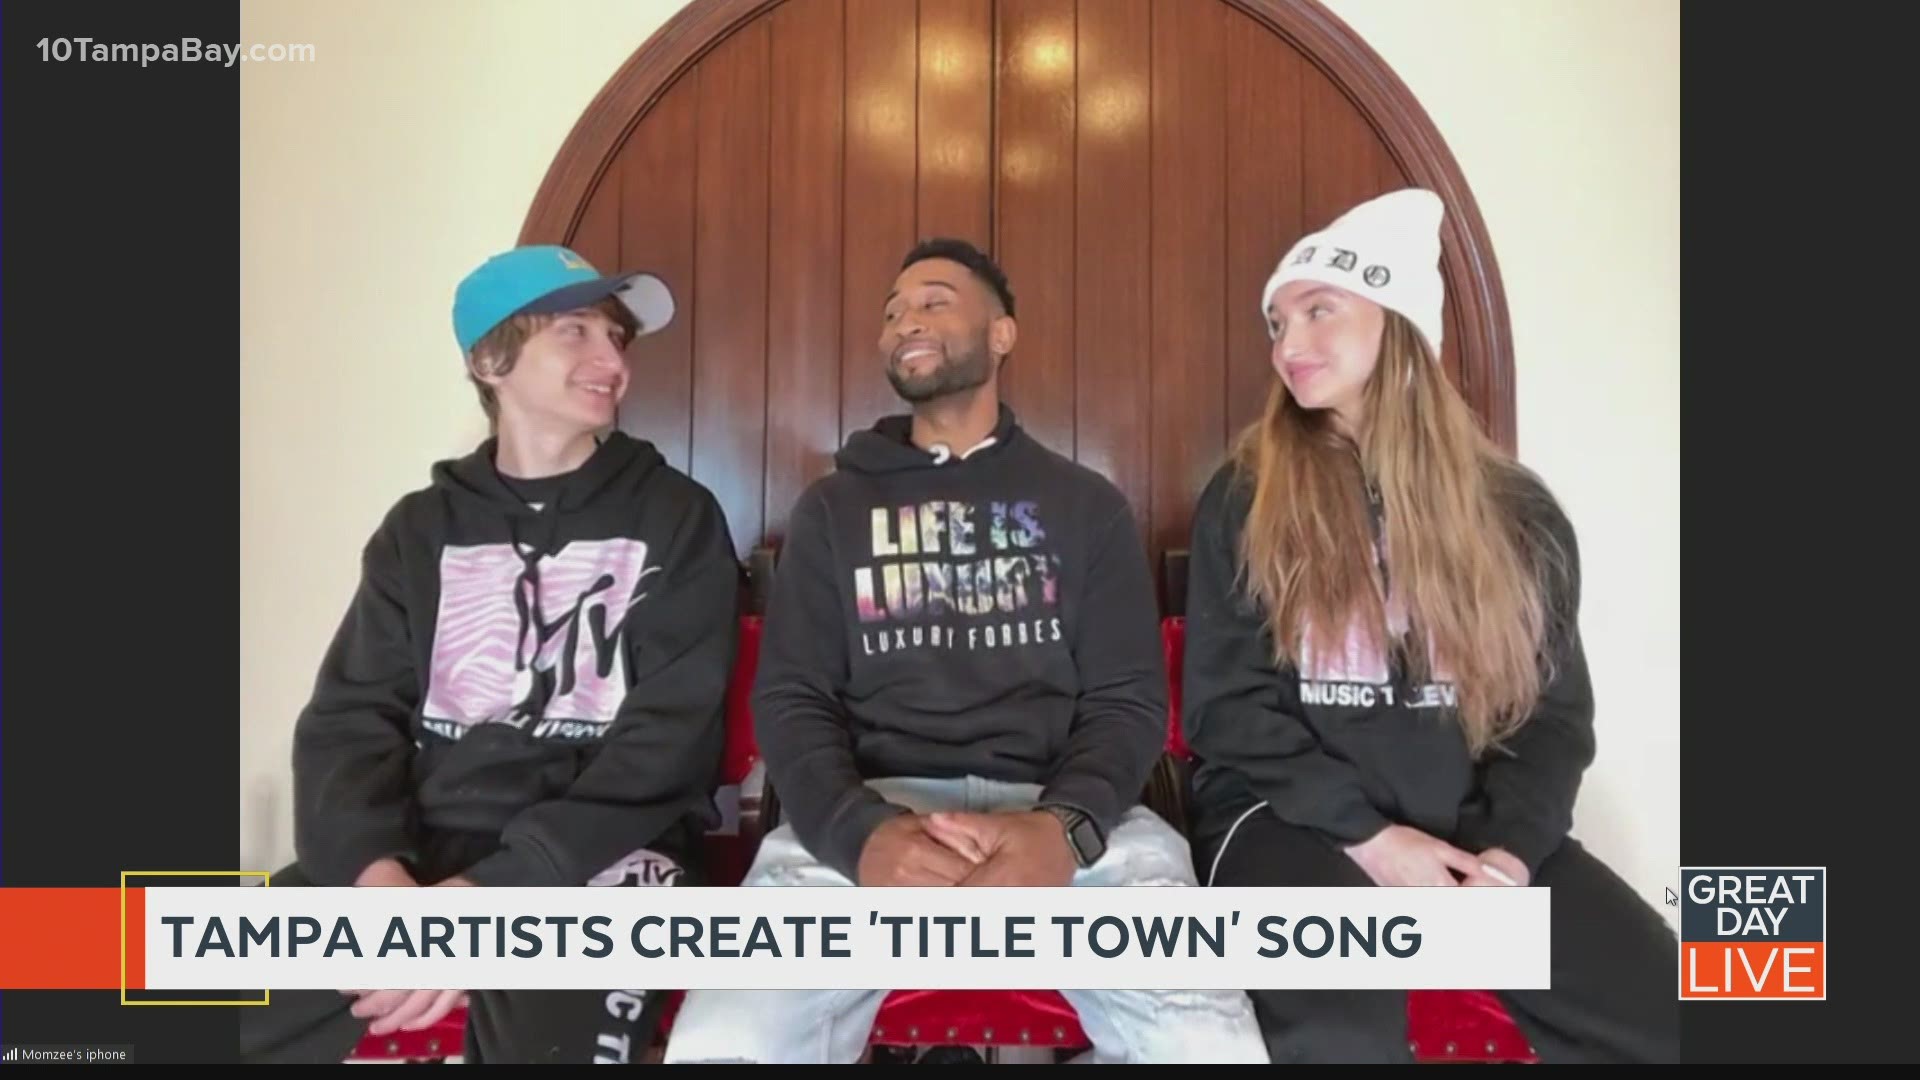 Local artists record song celebrating Tampa as a “Title Town”